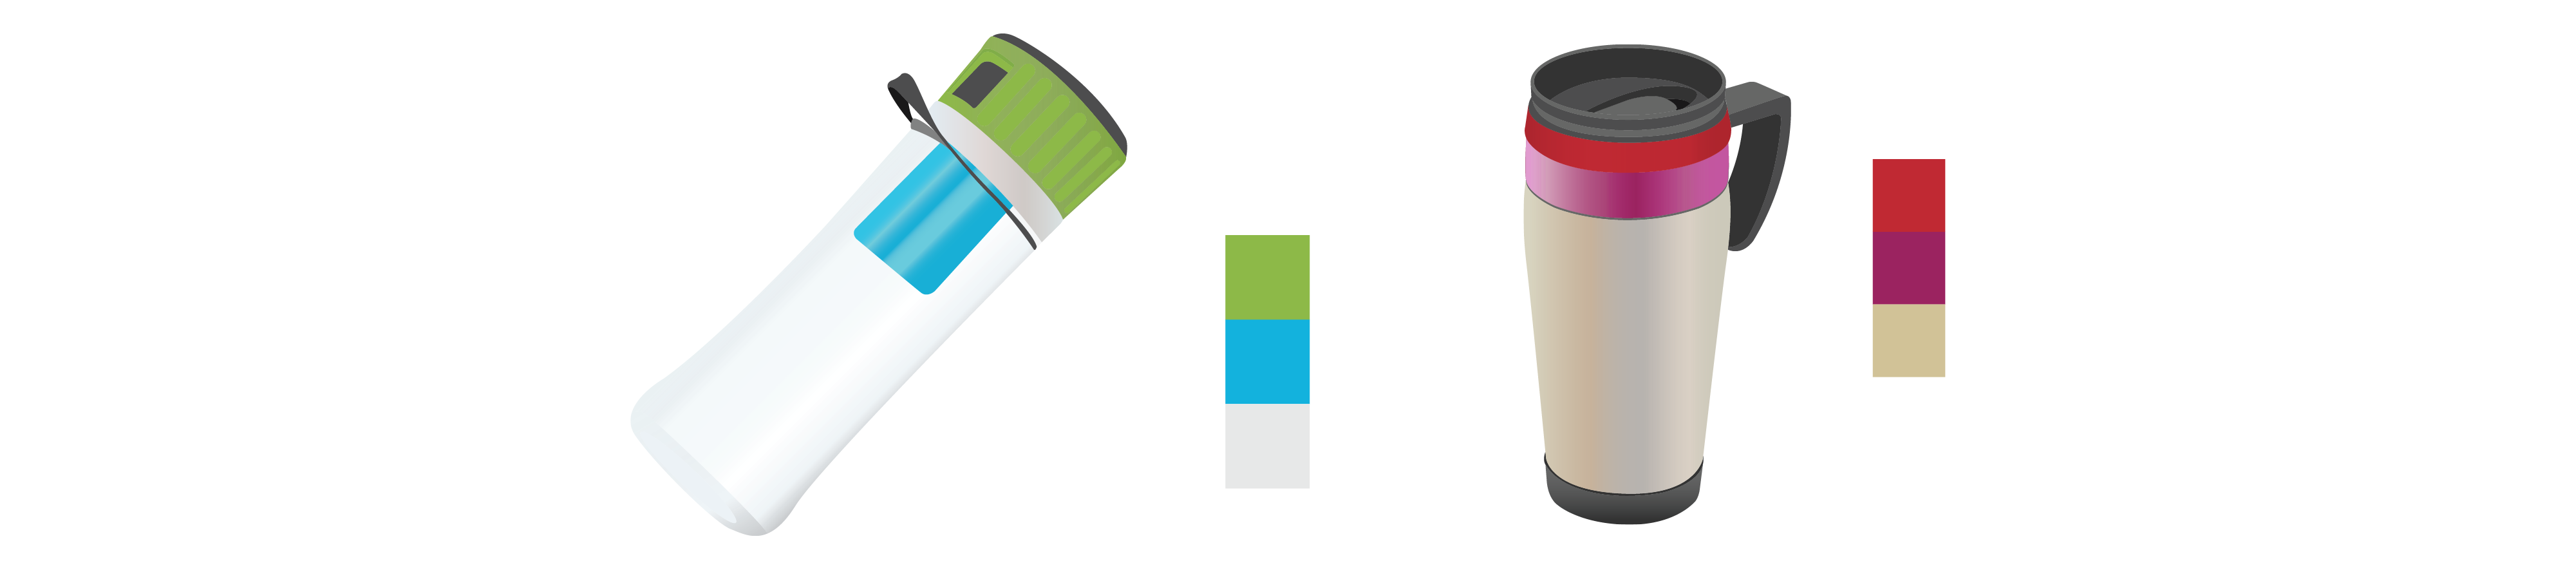 On the left, a transparent water bottle with a green lid and a blue filter inside the bottle. Beside the water bottle, there is a green, blue and white hexagon representing a cool colour scheme. On the right, there is a metal drinking thermos with a red strip on top of a purple strip as detailing. Beside the thermos there is a red, purple and silver hexagon representing a warm colour scheme.